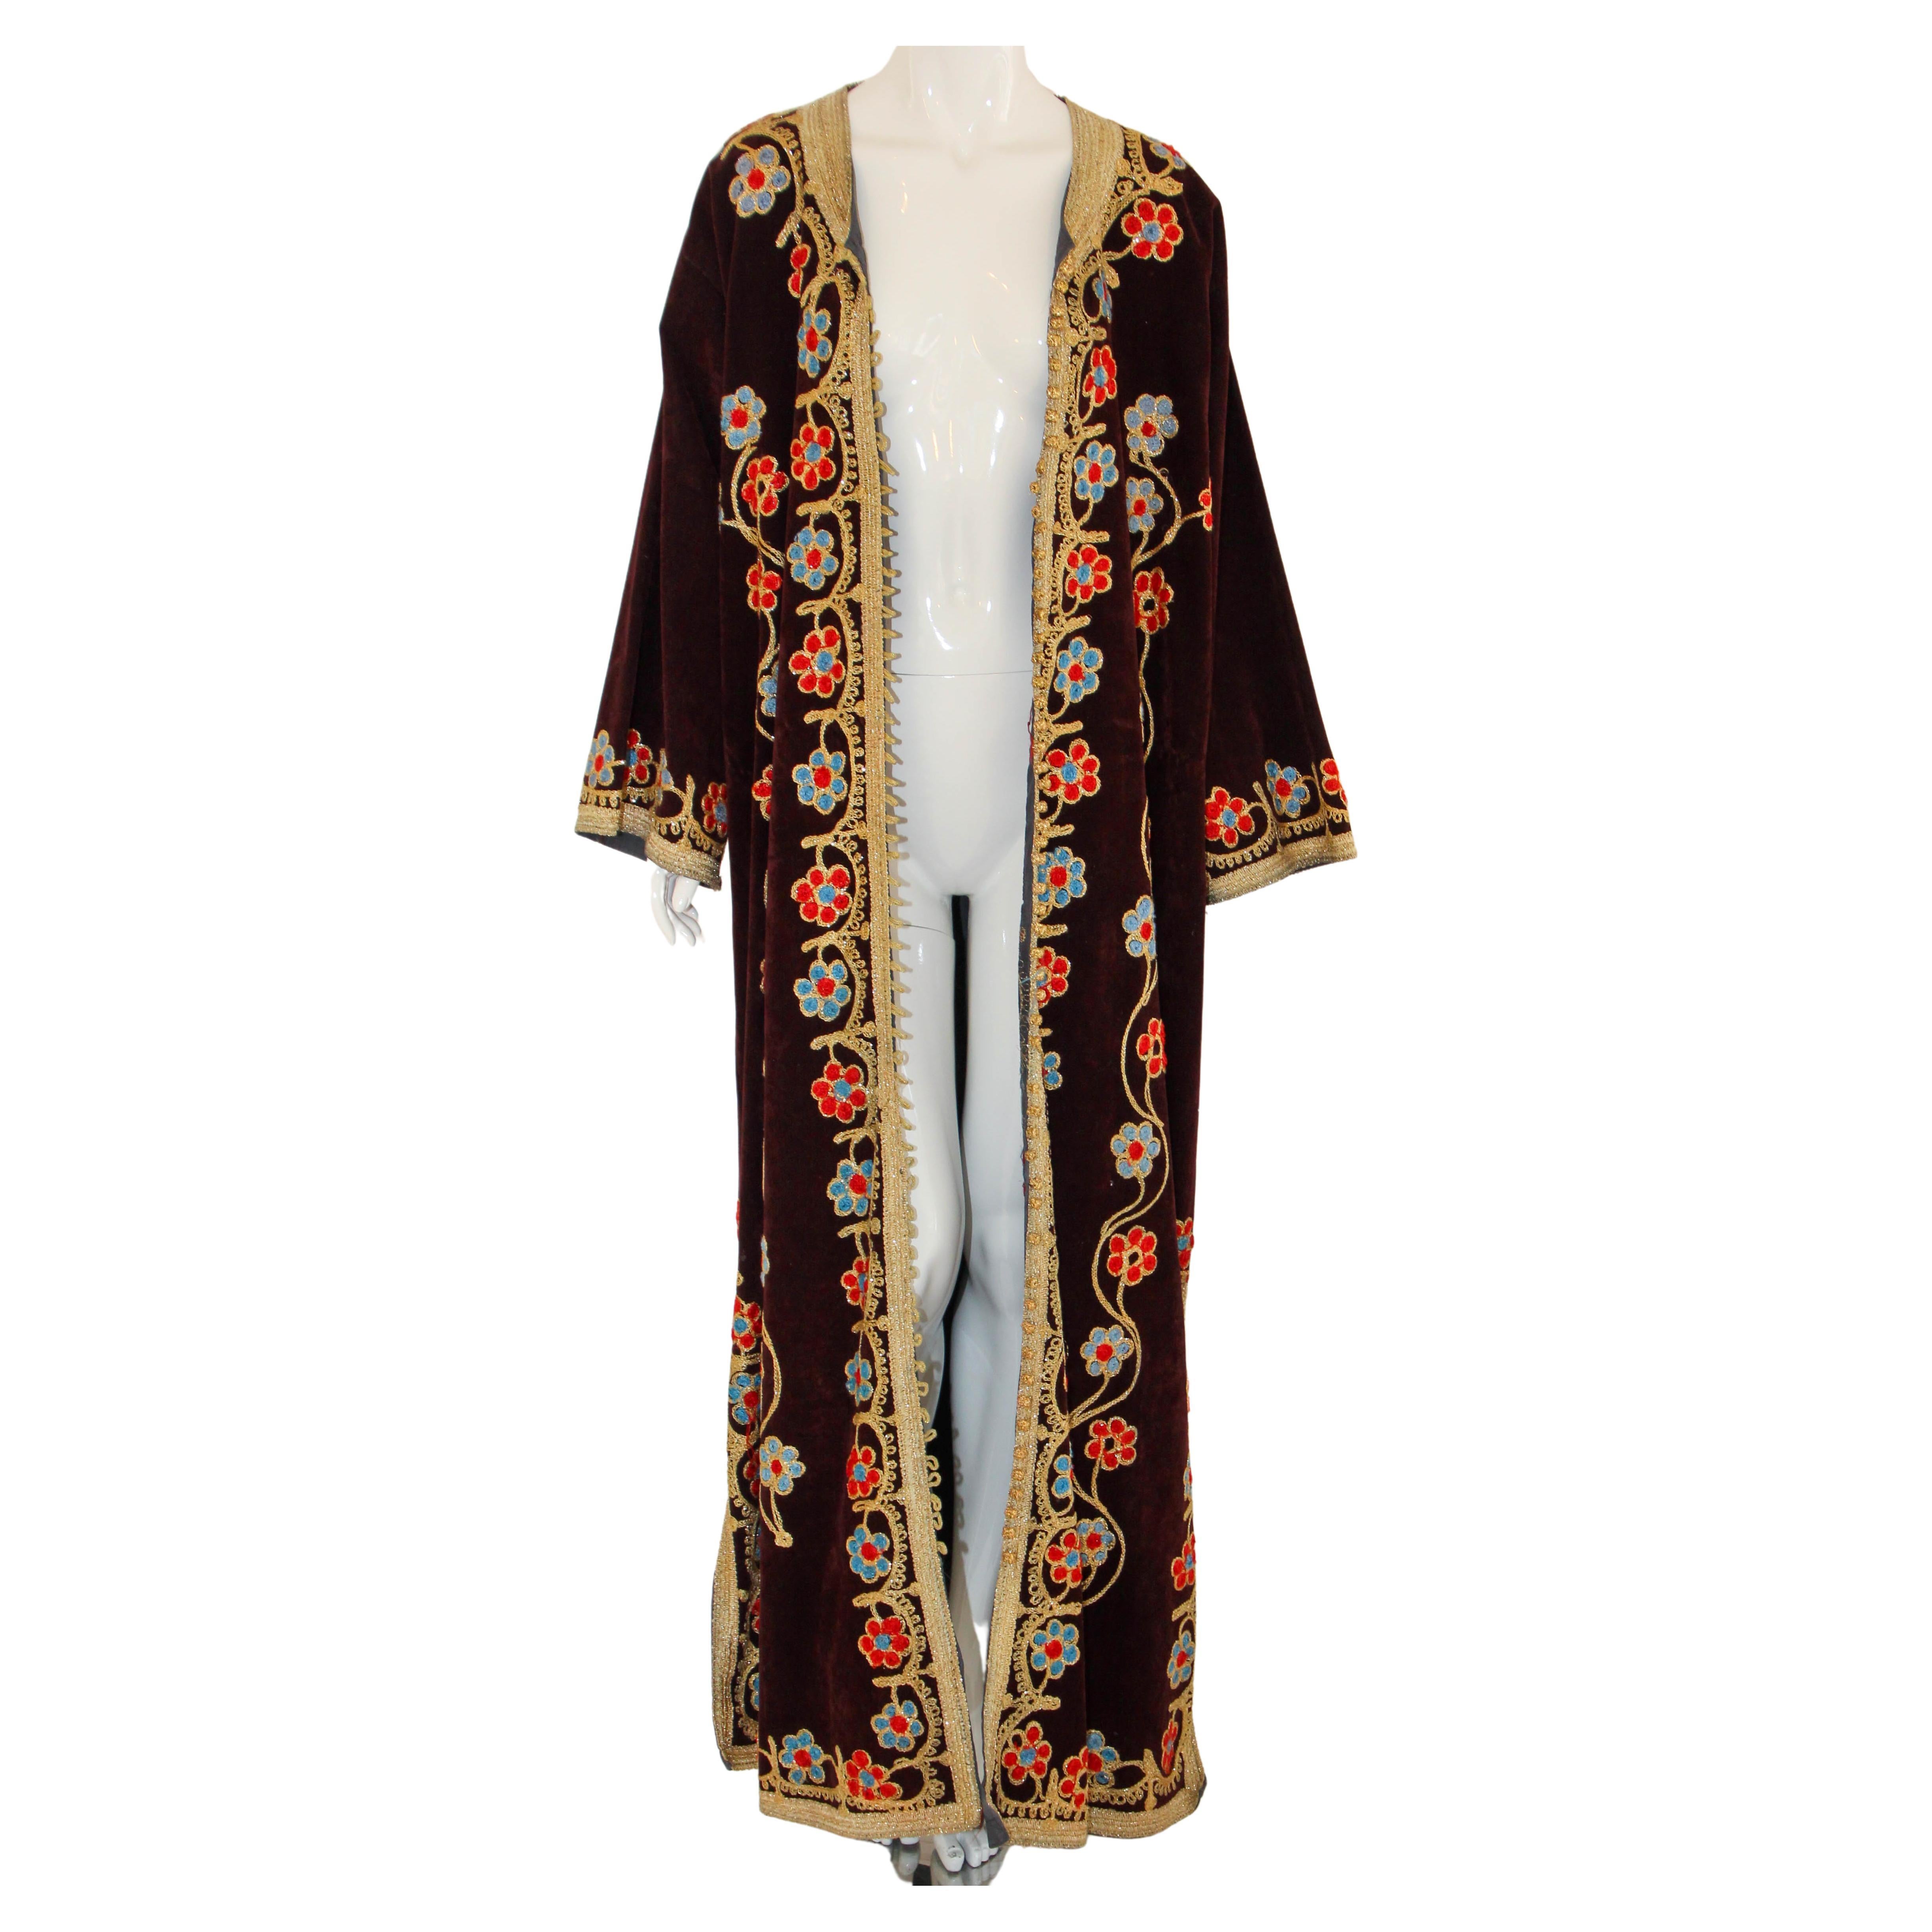 Elegant vintage Moroccan royal caftan velvet embroidered with gold metallic threads loop buttons, open all the way, could be worn open or closed,
circa 1960s.
This long maxi dress velvet Moorish caftan is embroidered and embellished entirely by